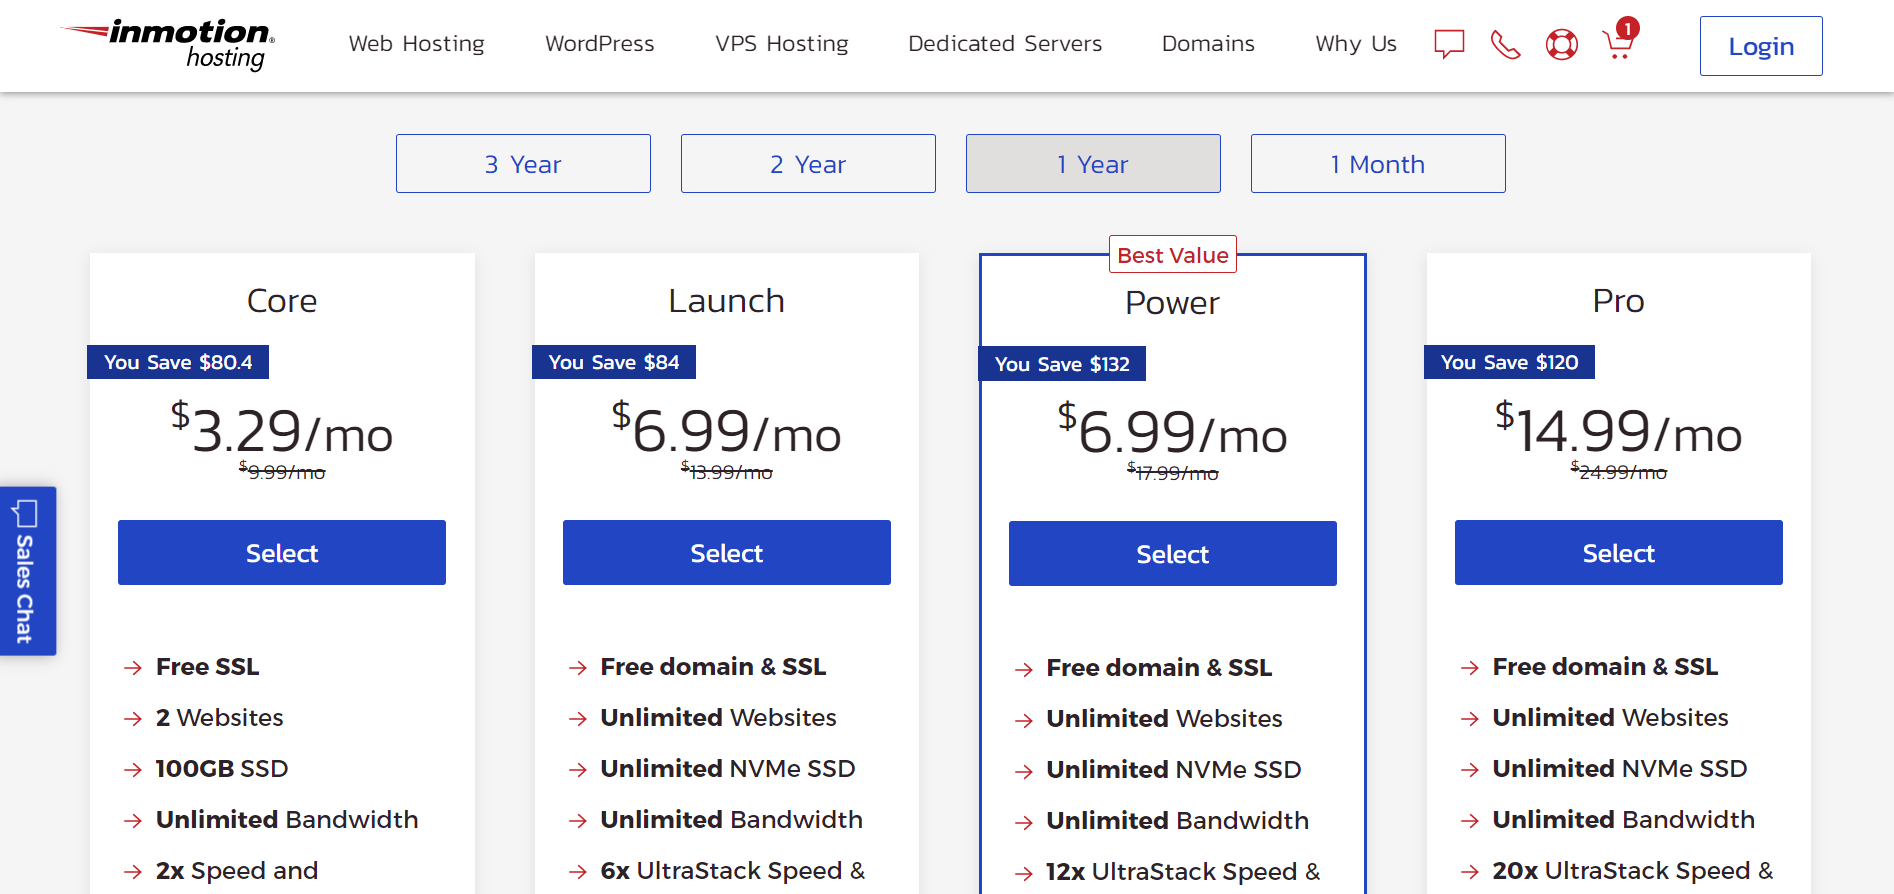 InMotion Hosting pricing page featuring 1-year plans